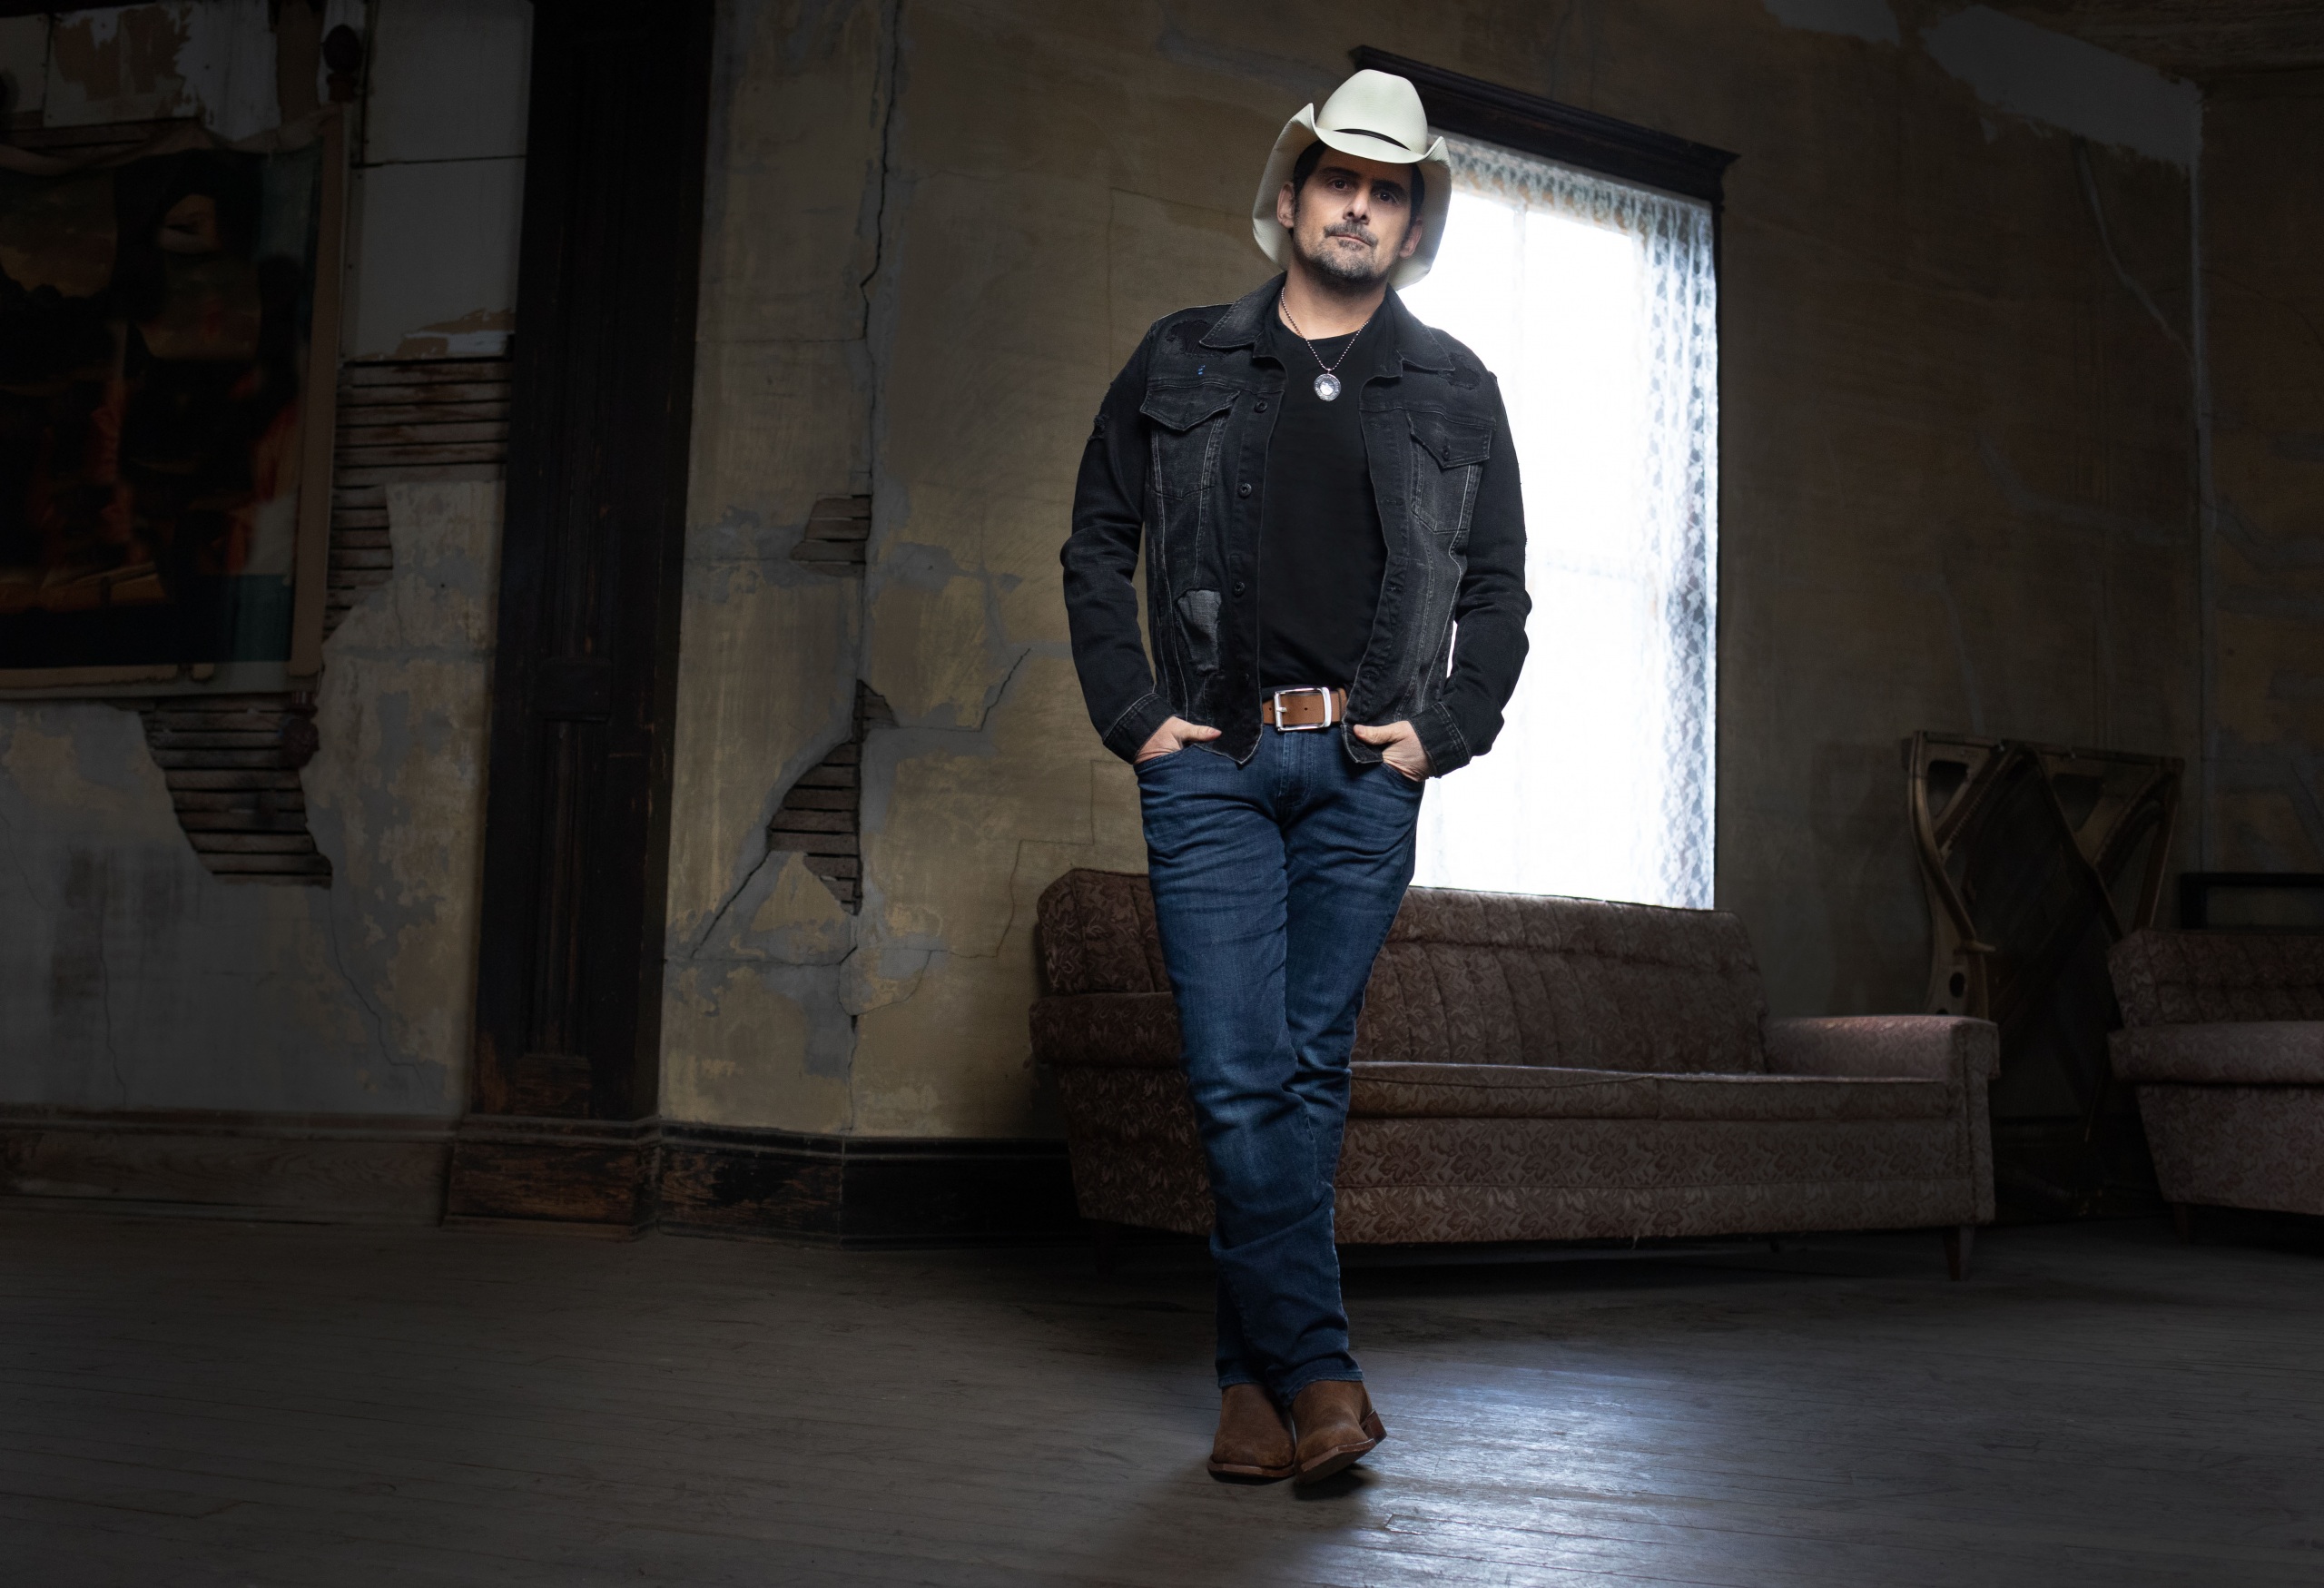 BRAD PAISLEY, KIMBERLY WILLIAMS-PAISLEY & NATIONWIDE PRESENT: “GROCERIES WITH DIGNITY & COMEDY WITHOUT” AT ZANIES IN NASHVILLE BENEFITTING THE STORE.